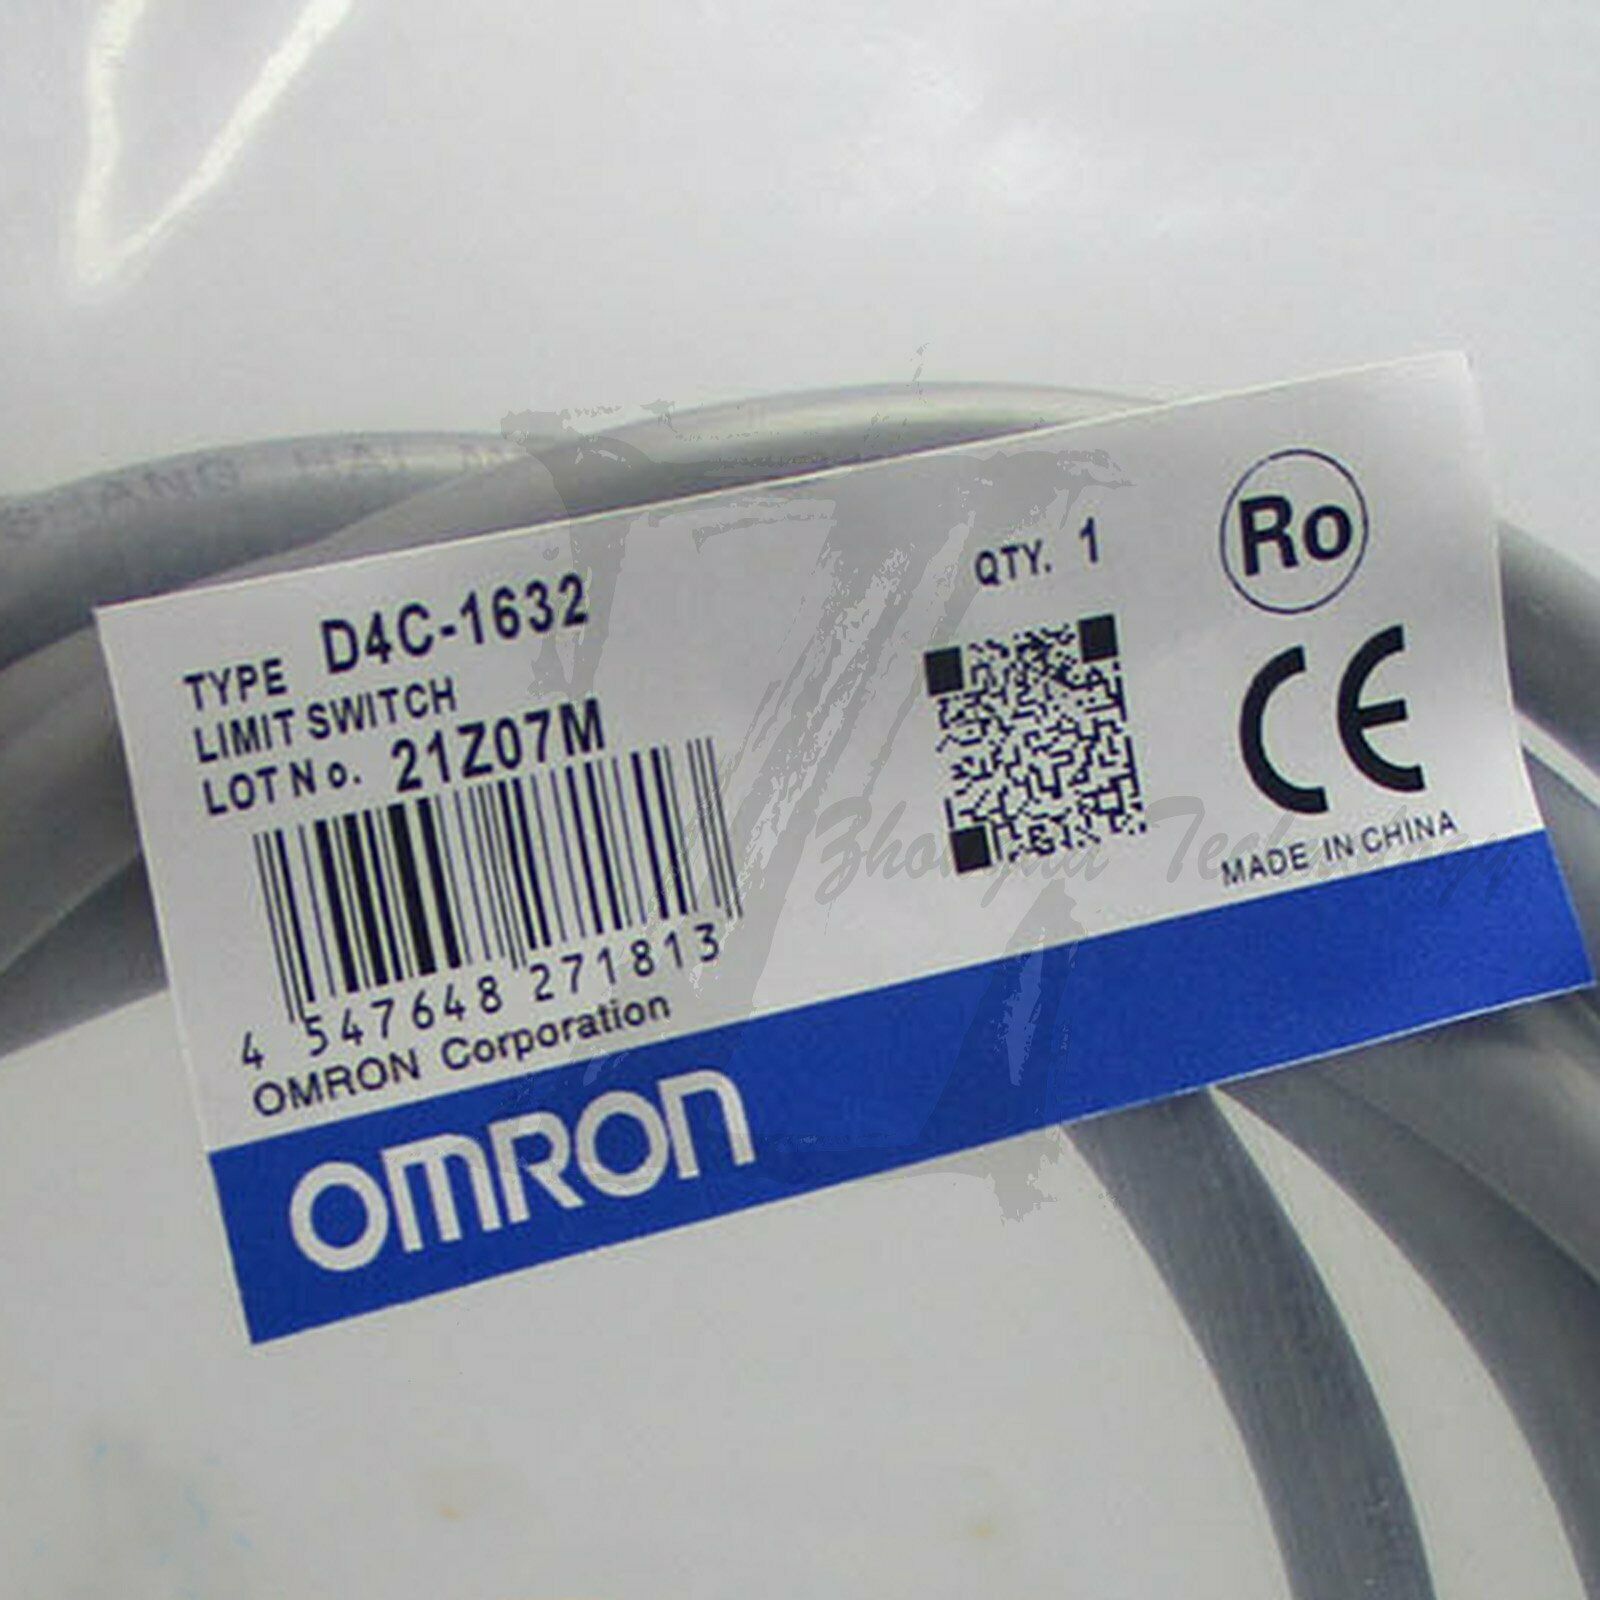 1pc new Omron D4C-1632 module one year warranty KOEED 101-200, 80%, import_2020_10_10_031751, Omron, Other